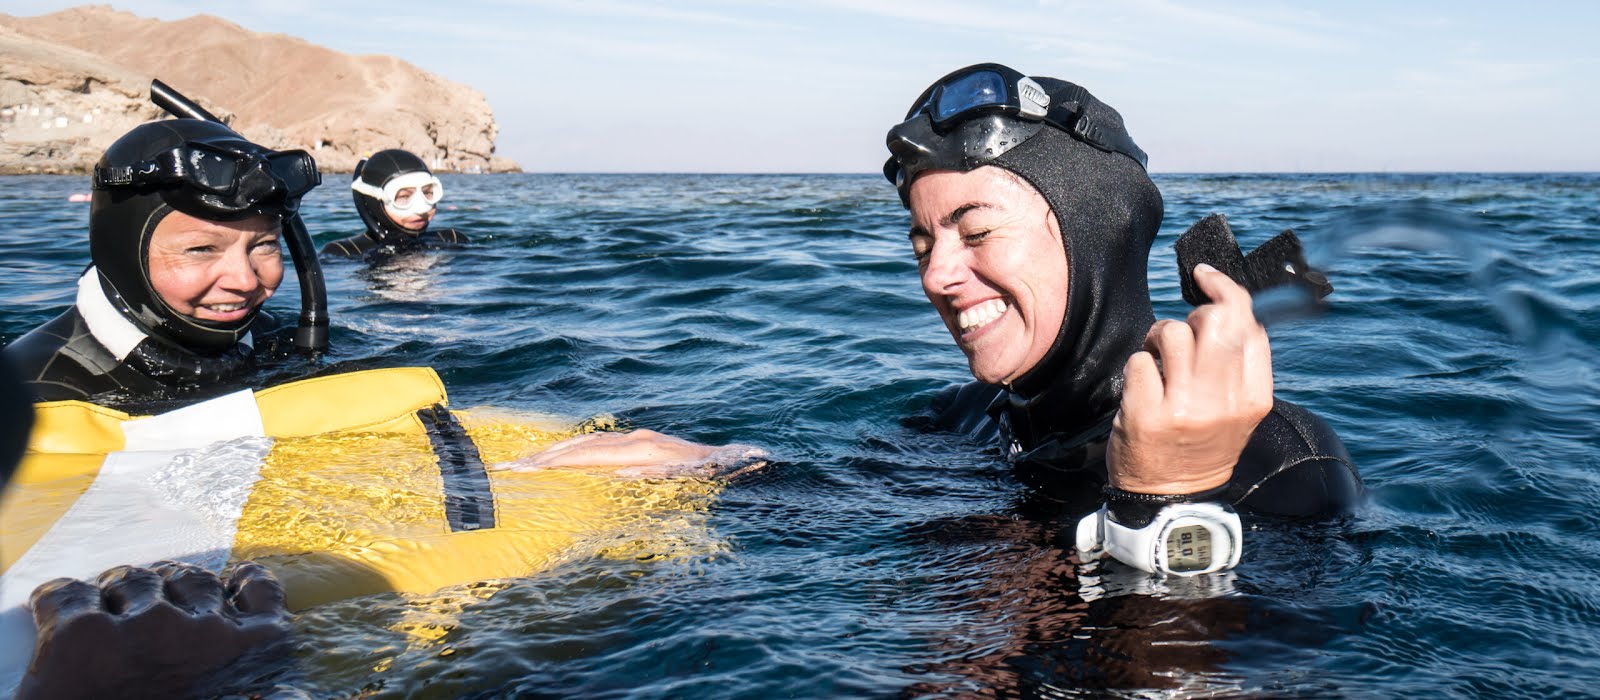 Feel stuck? It’s time to cultivate a “curious yes” approach, says author and Irish freediver Claire Walsh